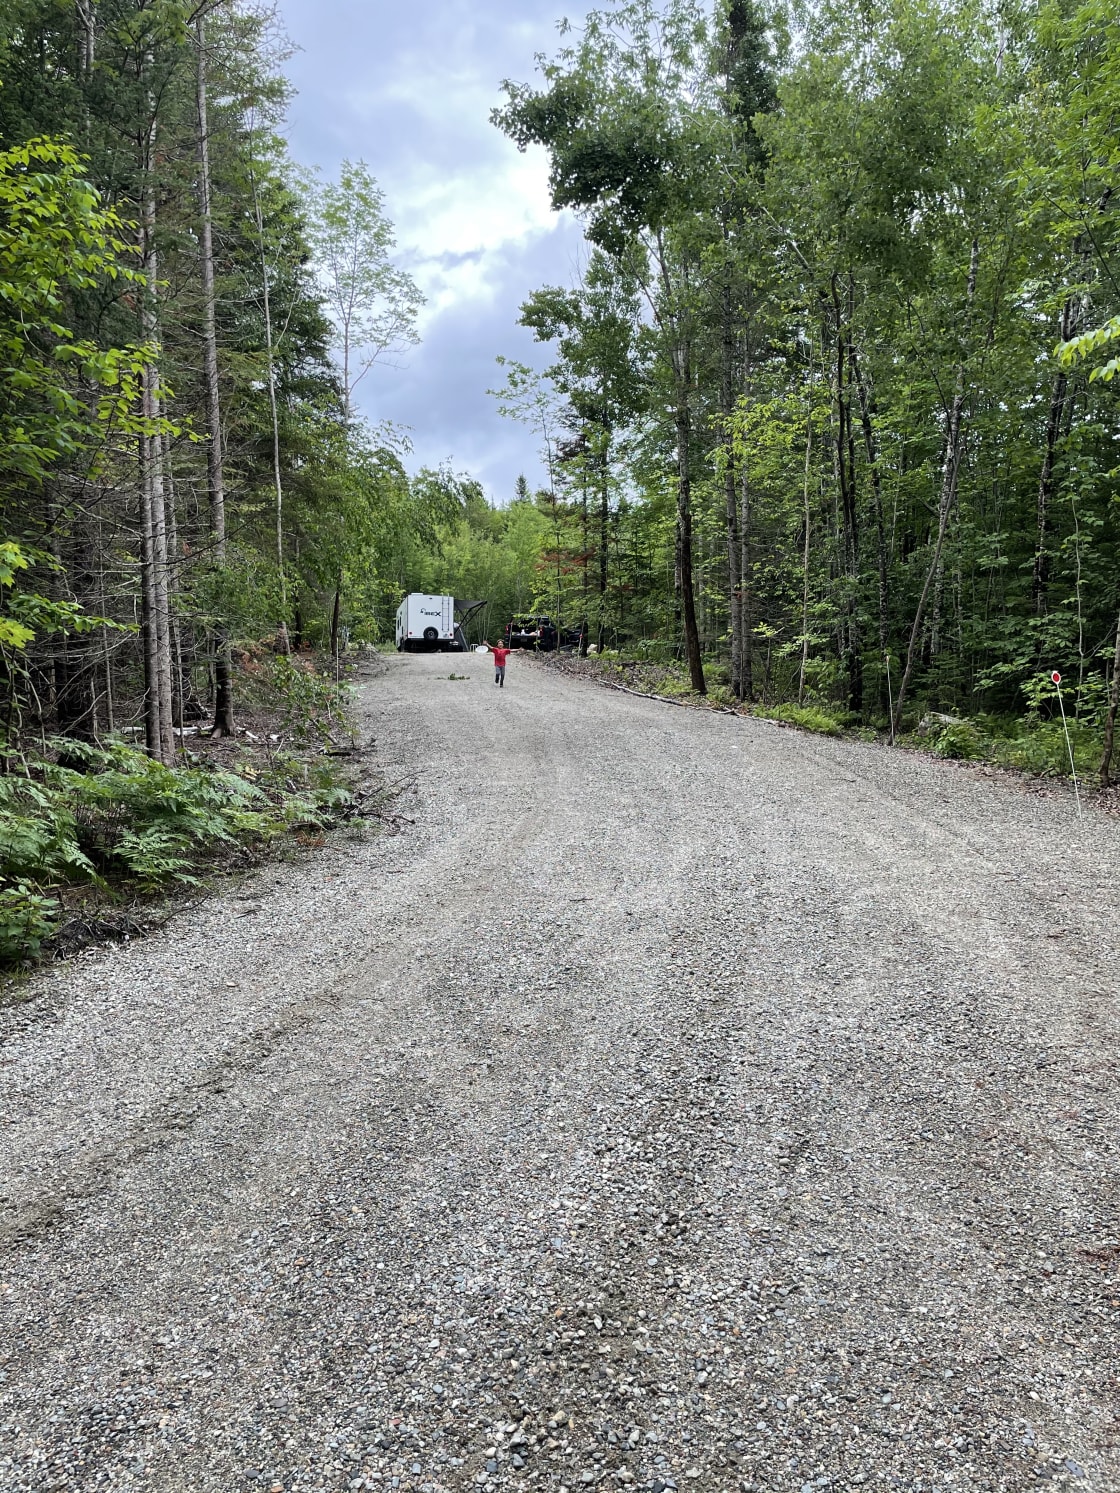 Driveway into Camp with Stone Fireplace